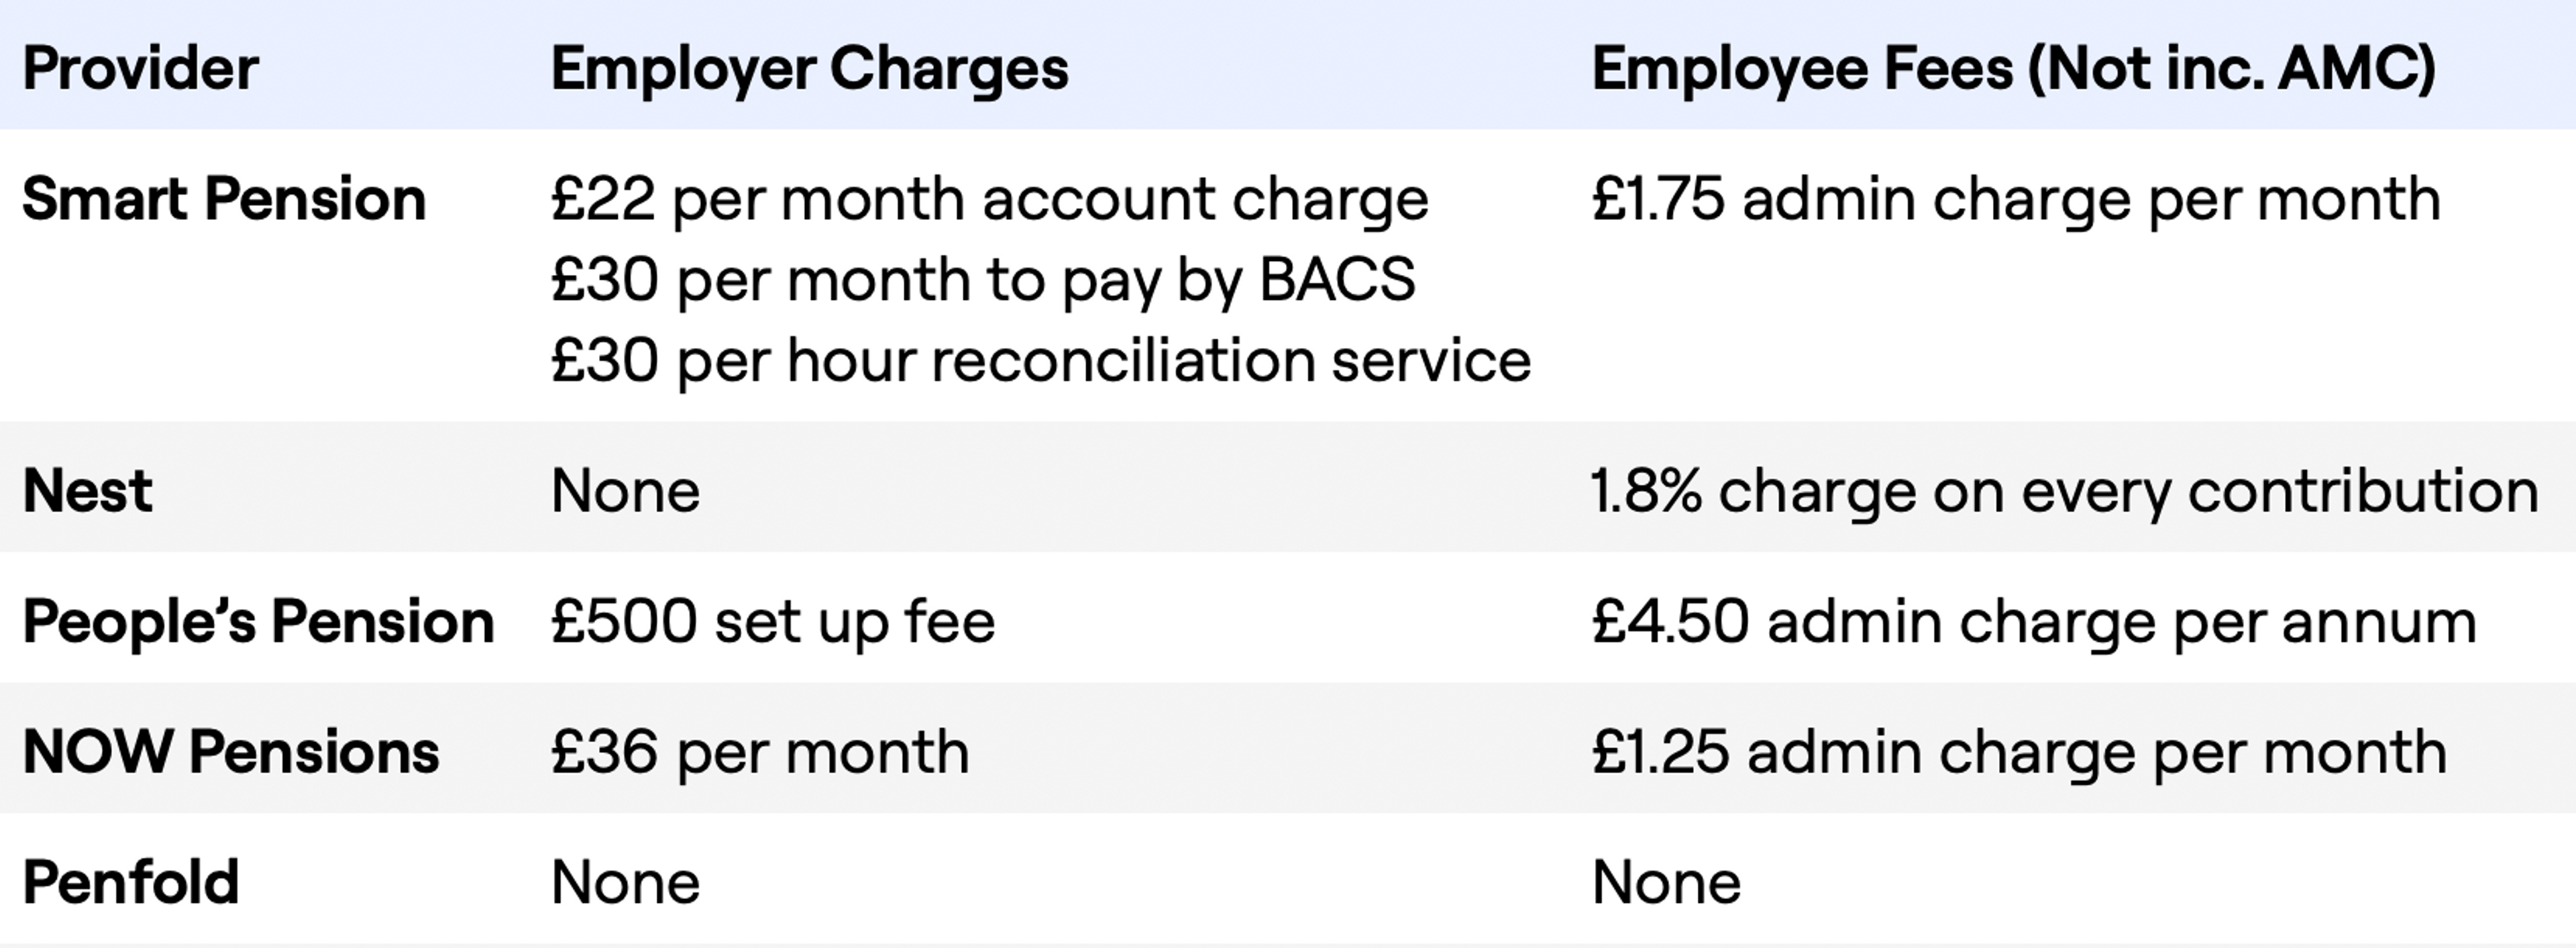 A table showing pension provider charges for employers and employees